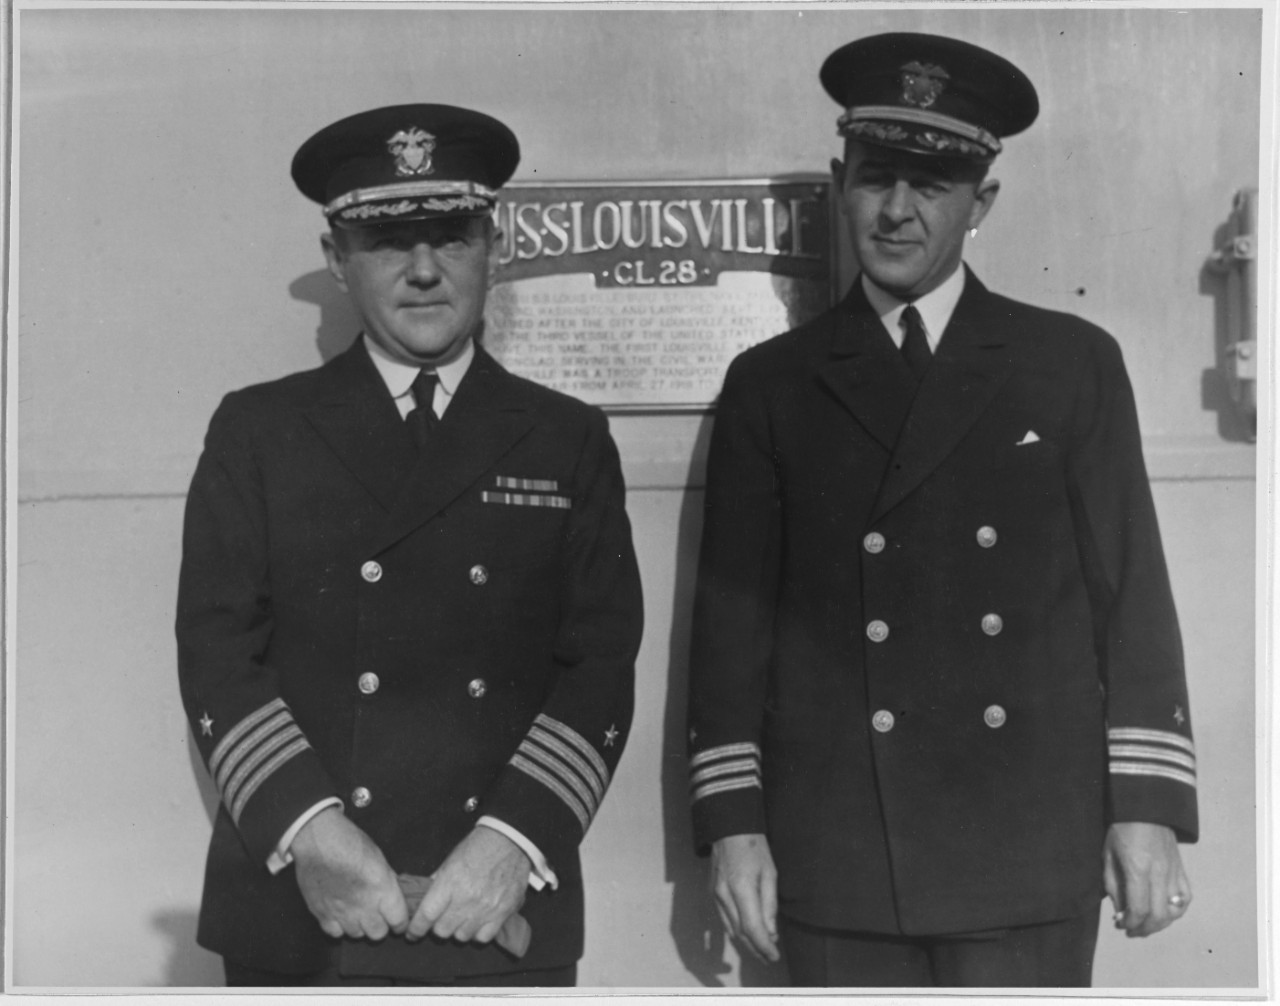 Captain E.J. Marquart, USN as commanding officer, USS LOUISVILLE (CL-28), with his executive officer, Commander L.G. Thebault, USN, 1932